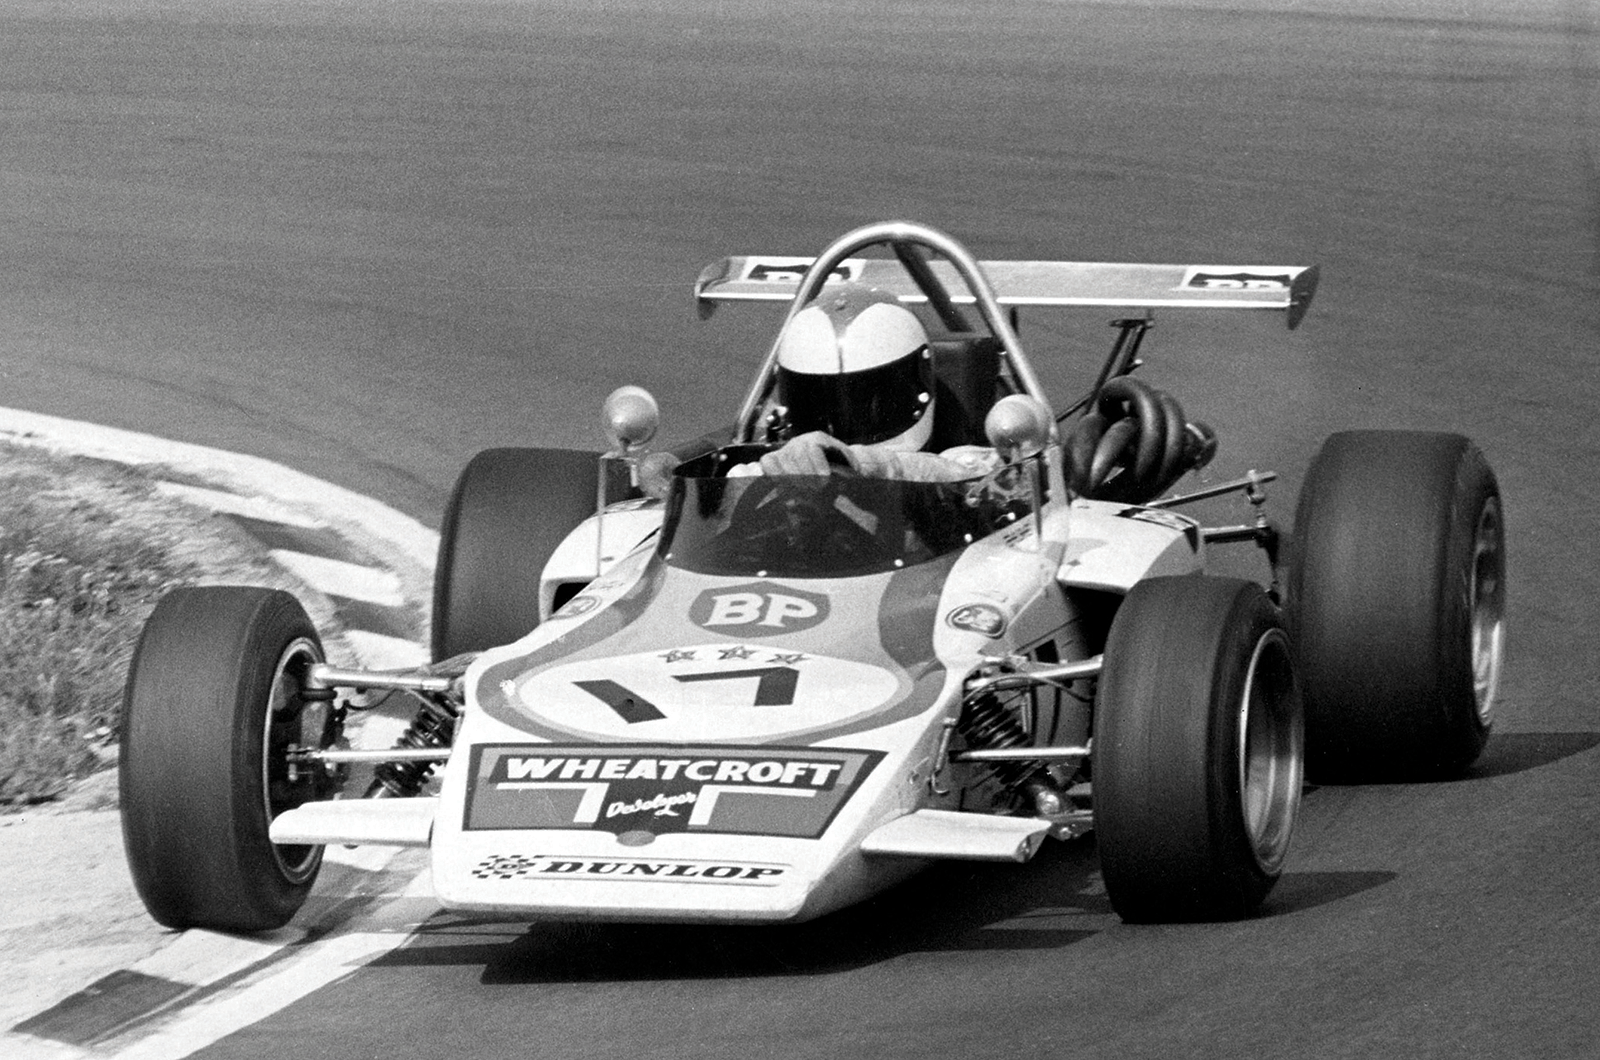 Classic & Sports Car – Taken too soon: remembering F1 star Roger Williamson